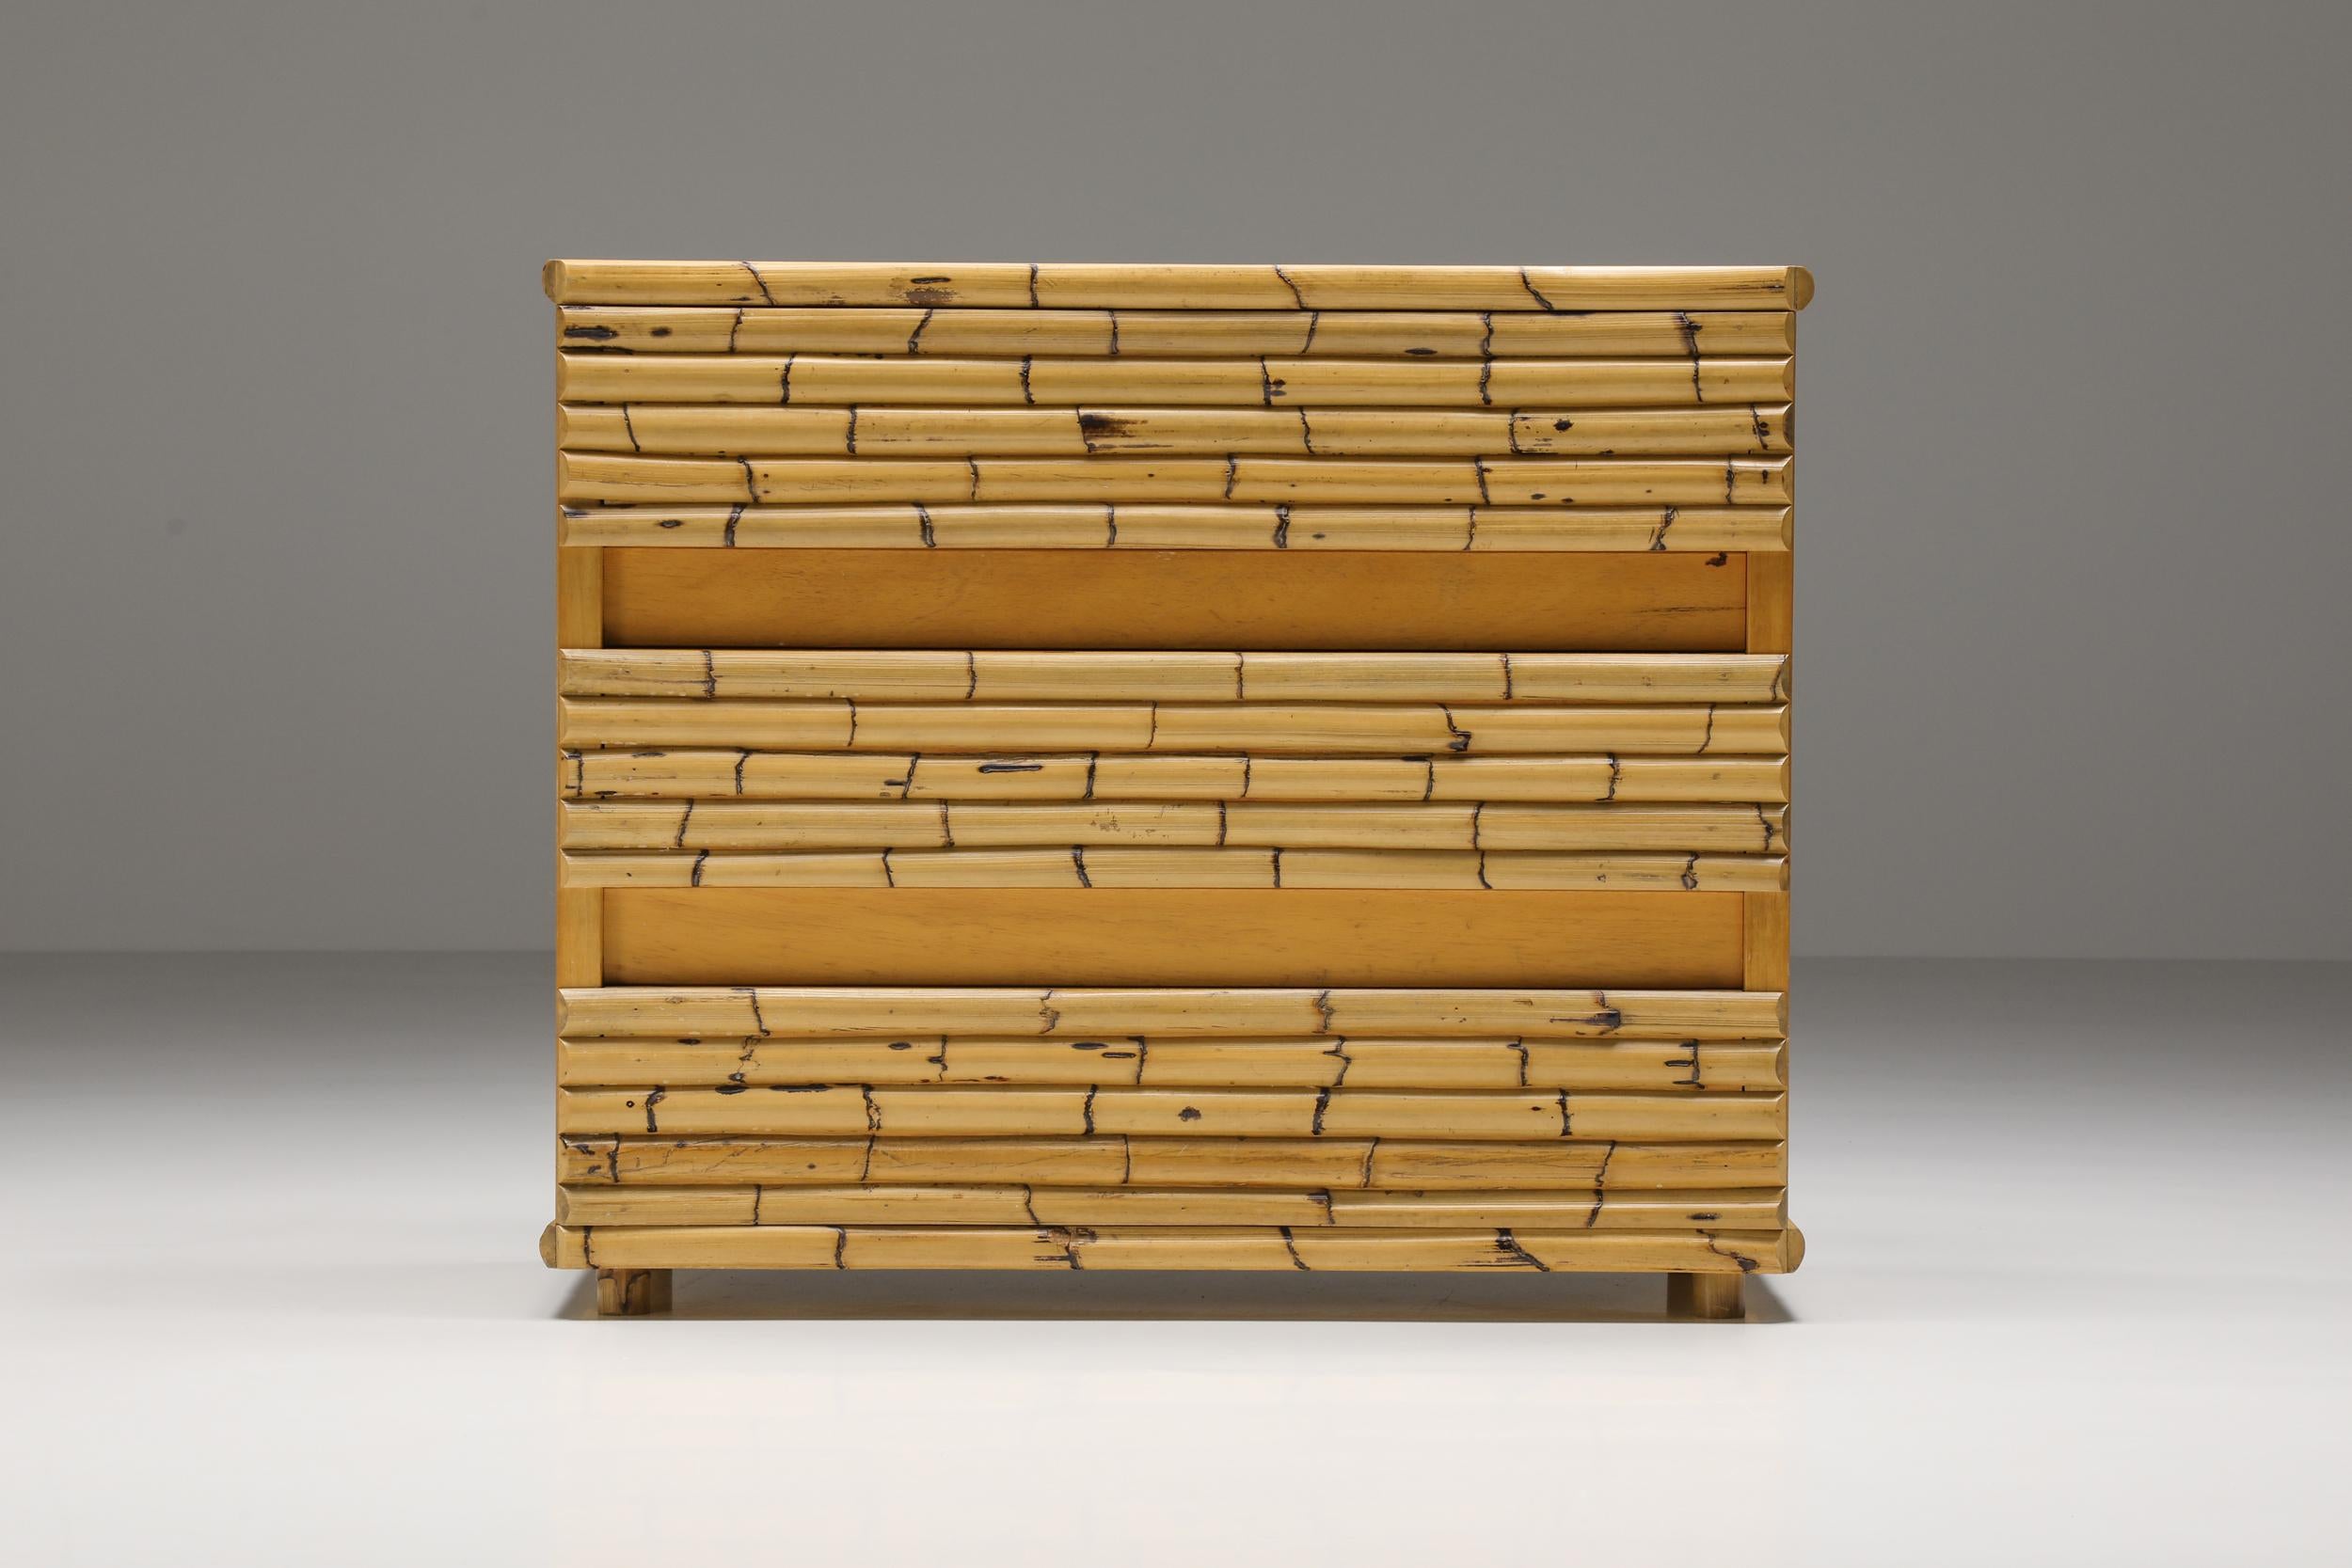 Tropical modern bamboo chest of drawers designed by Italian architect Venturini from Florence. The high-quality piece is made out of 3 larger drawers and finished with Bamboo. Would work well in a Gabriella Crespi-inspired tropical Hollywood Regency